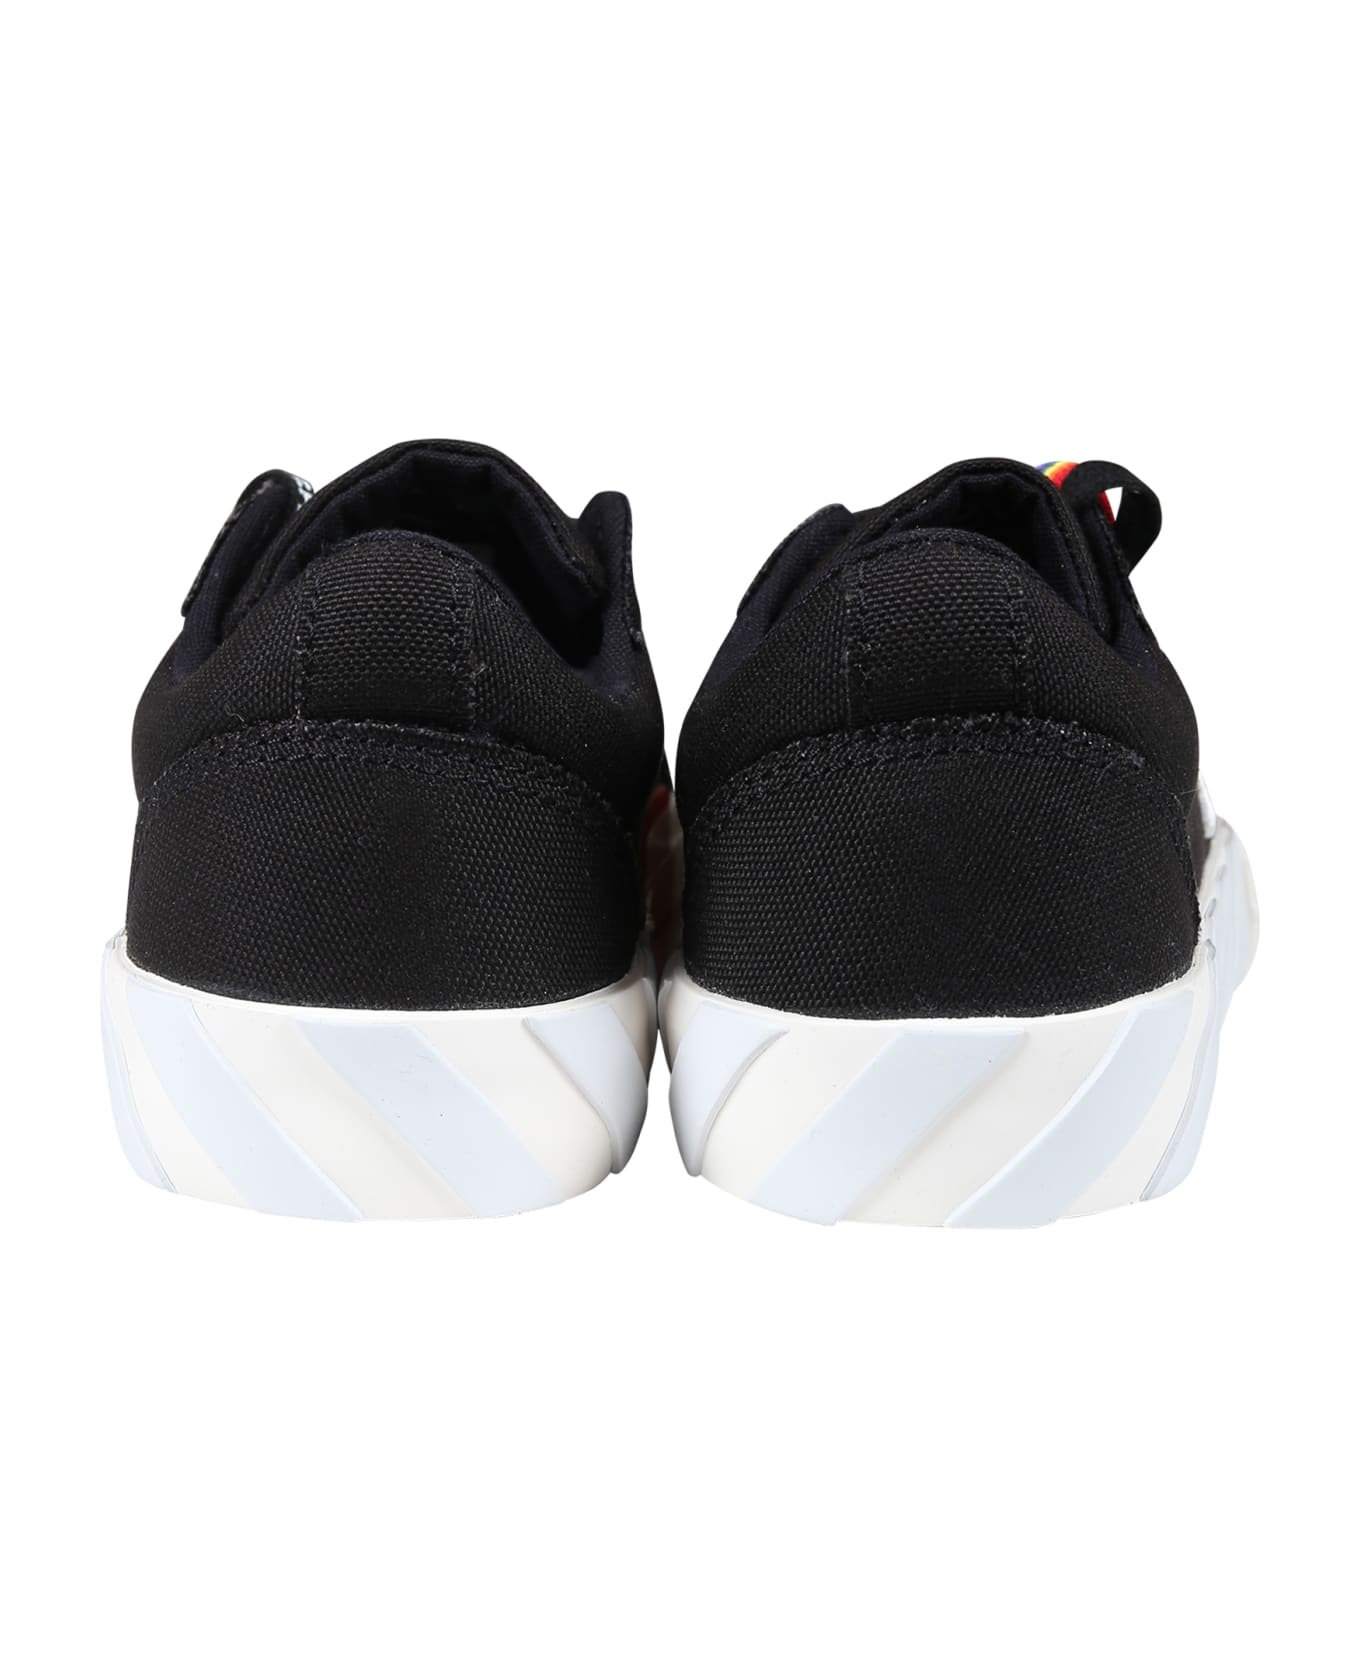 Off-White Black Sneakers For Girl With Arrow - Black